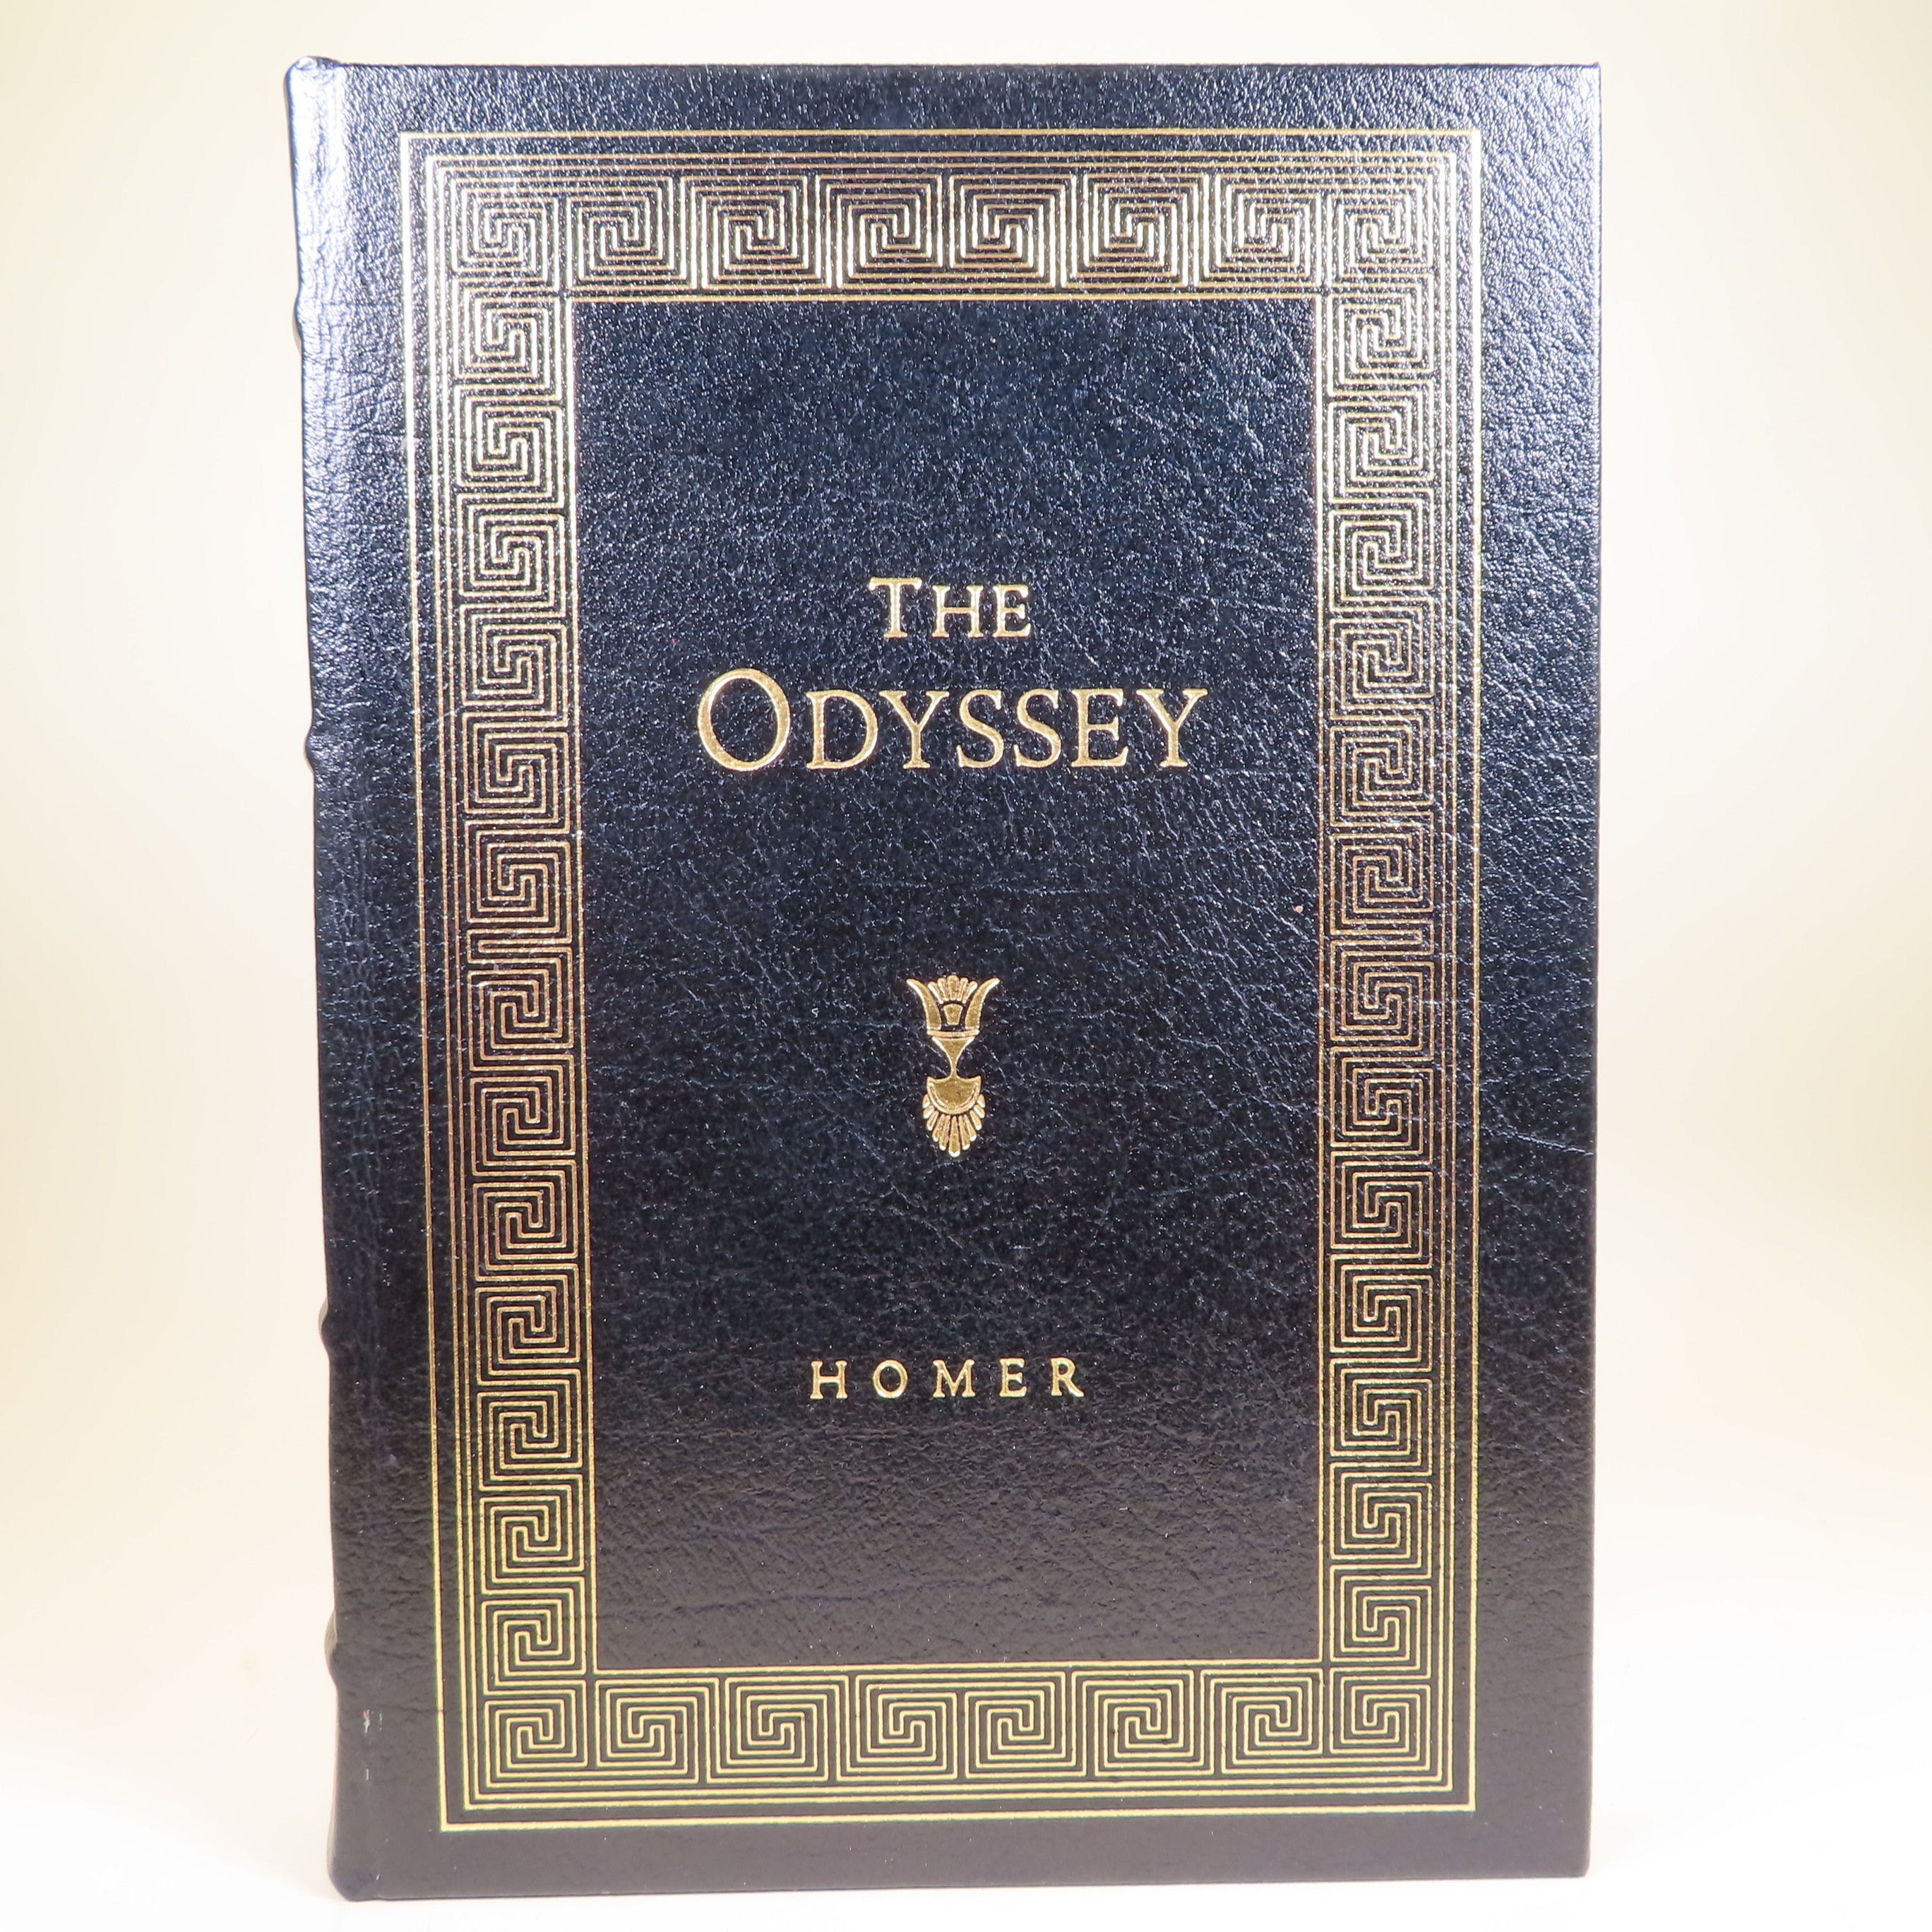 The Odyssey - Homer; Translated by Robert Fagles. Introduction by Bernard Knox.